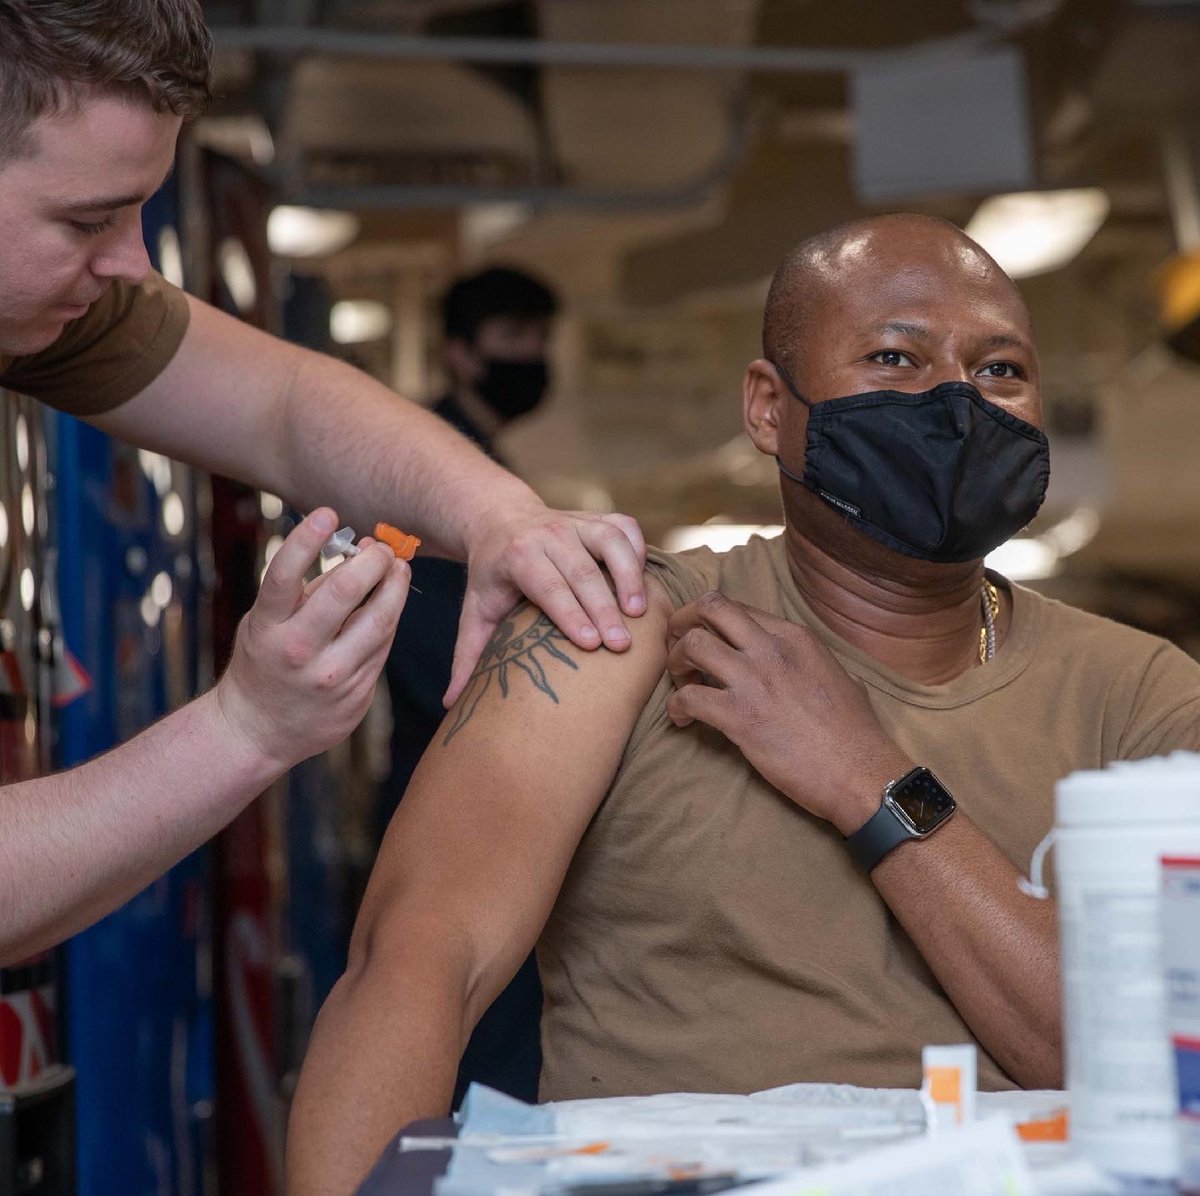 #USSGW is hosting a SHOTEX this week where all Sailors are eligible to get the #COVID19Vaccine on a voluntary basis. @USNavy #sinkcovid 📸 by MC3 Robert Stamer